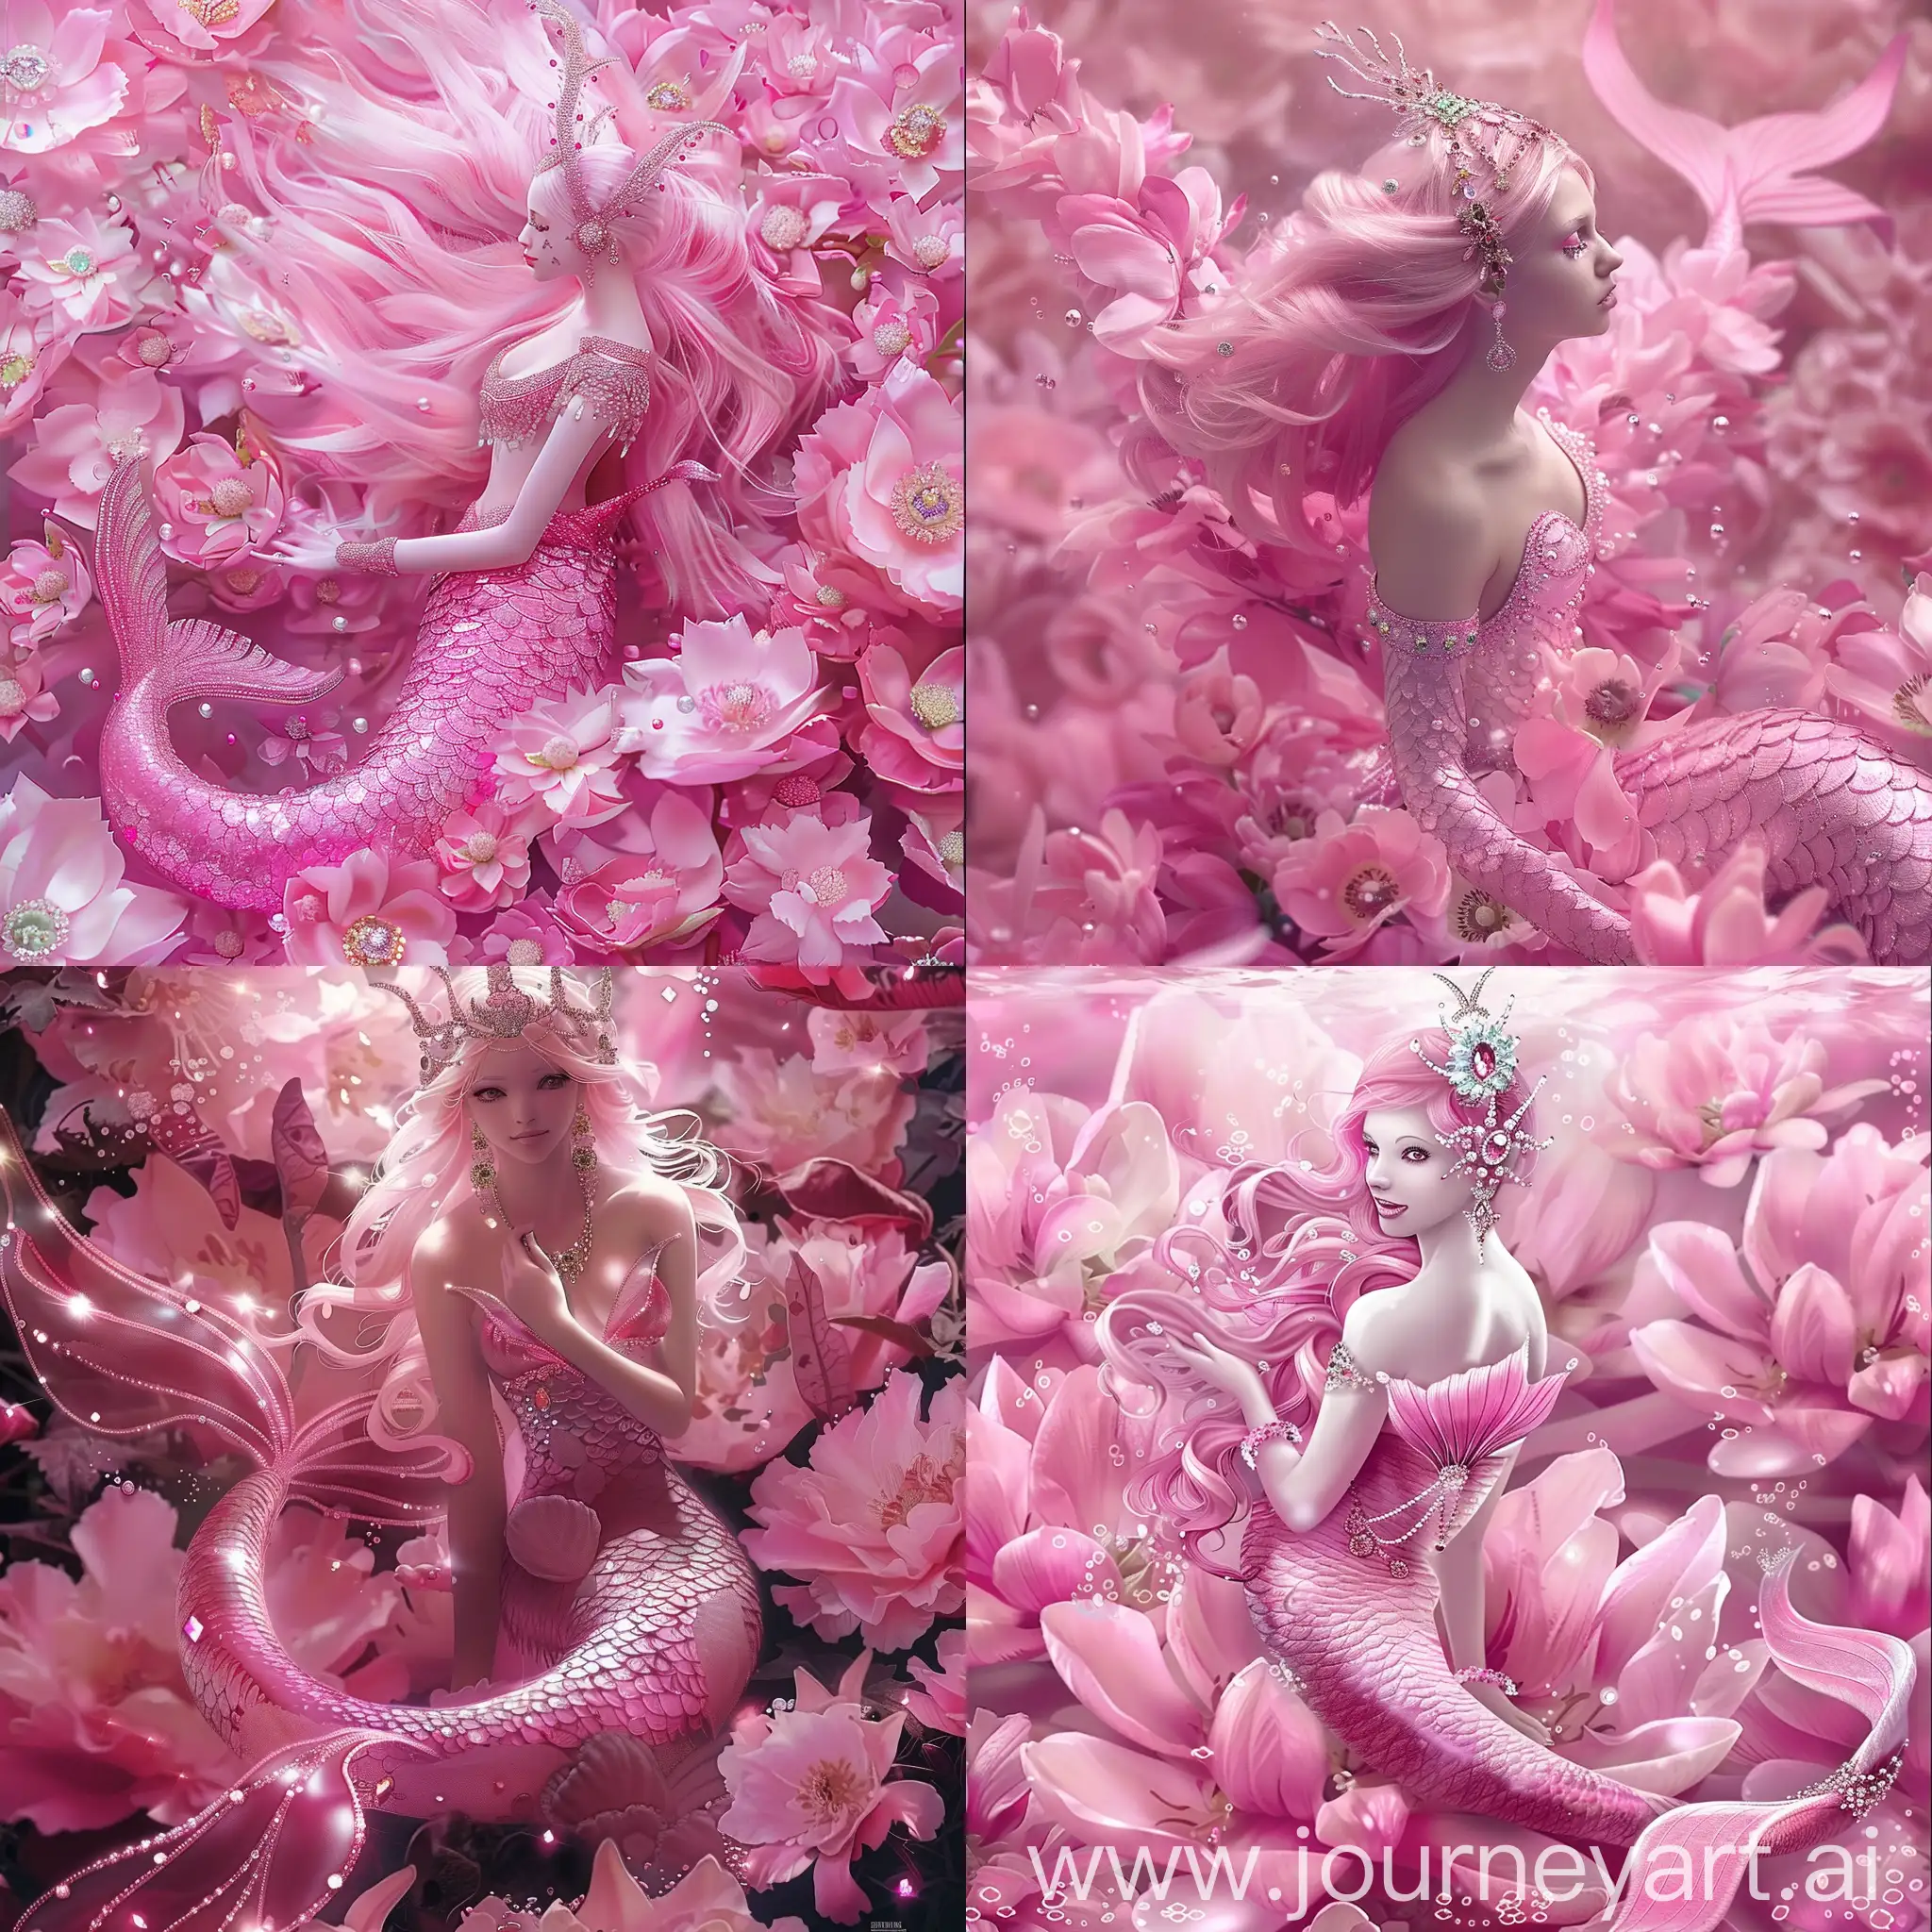 Pink-Mermaid-with-Jewels-Sitting-on-Pink-Flowers